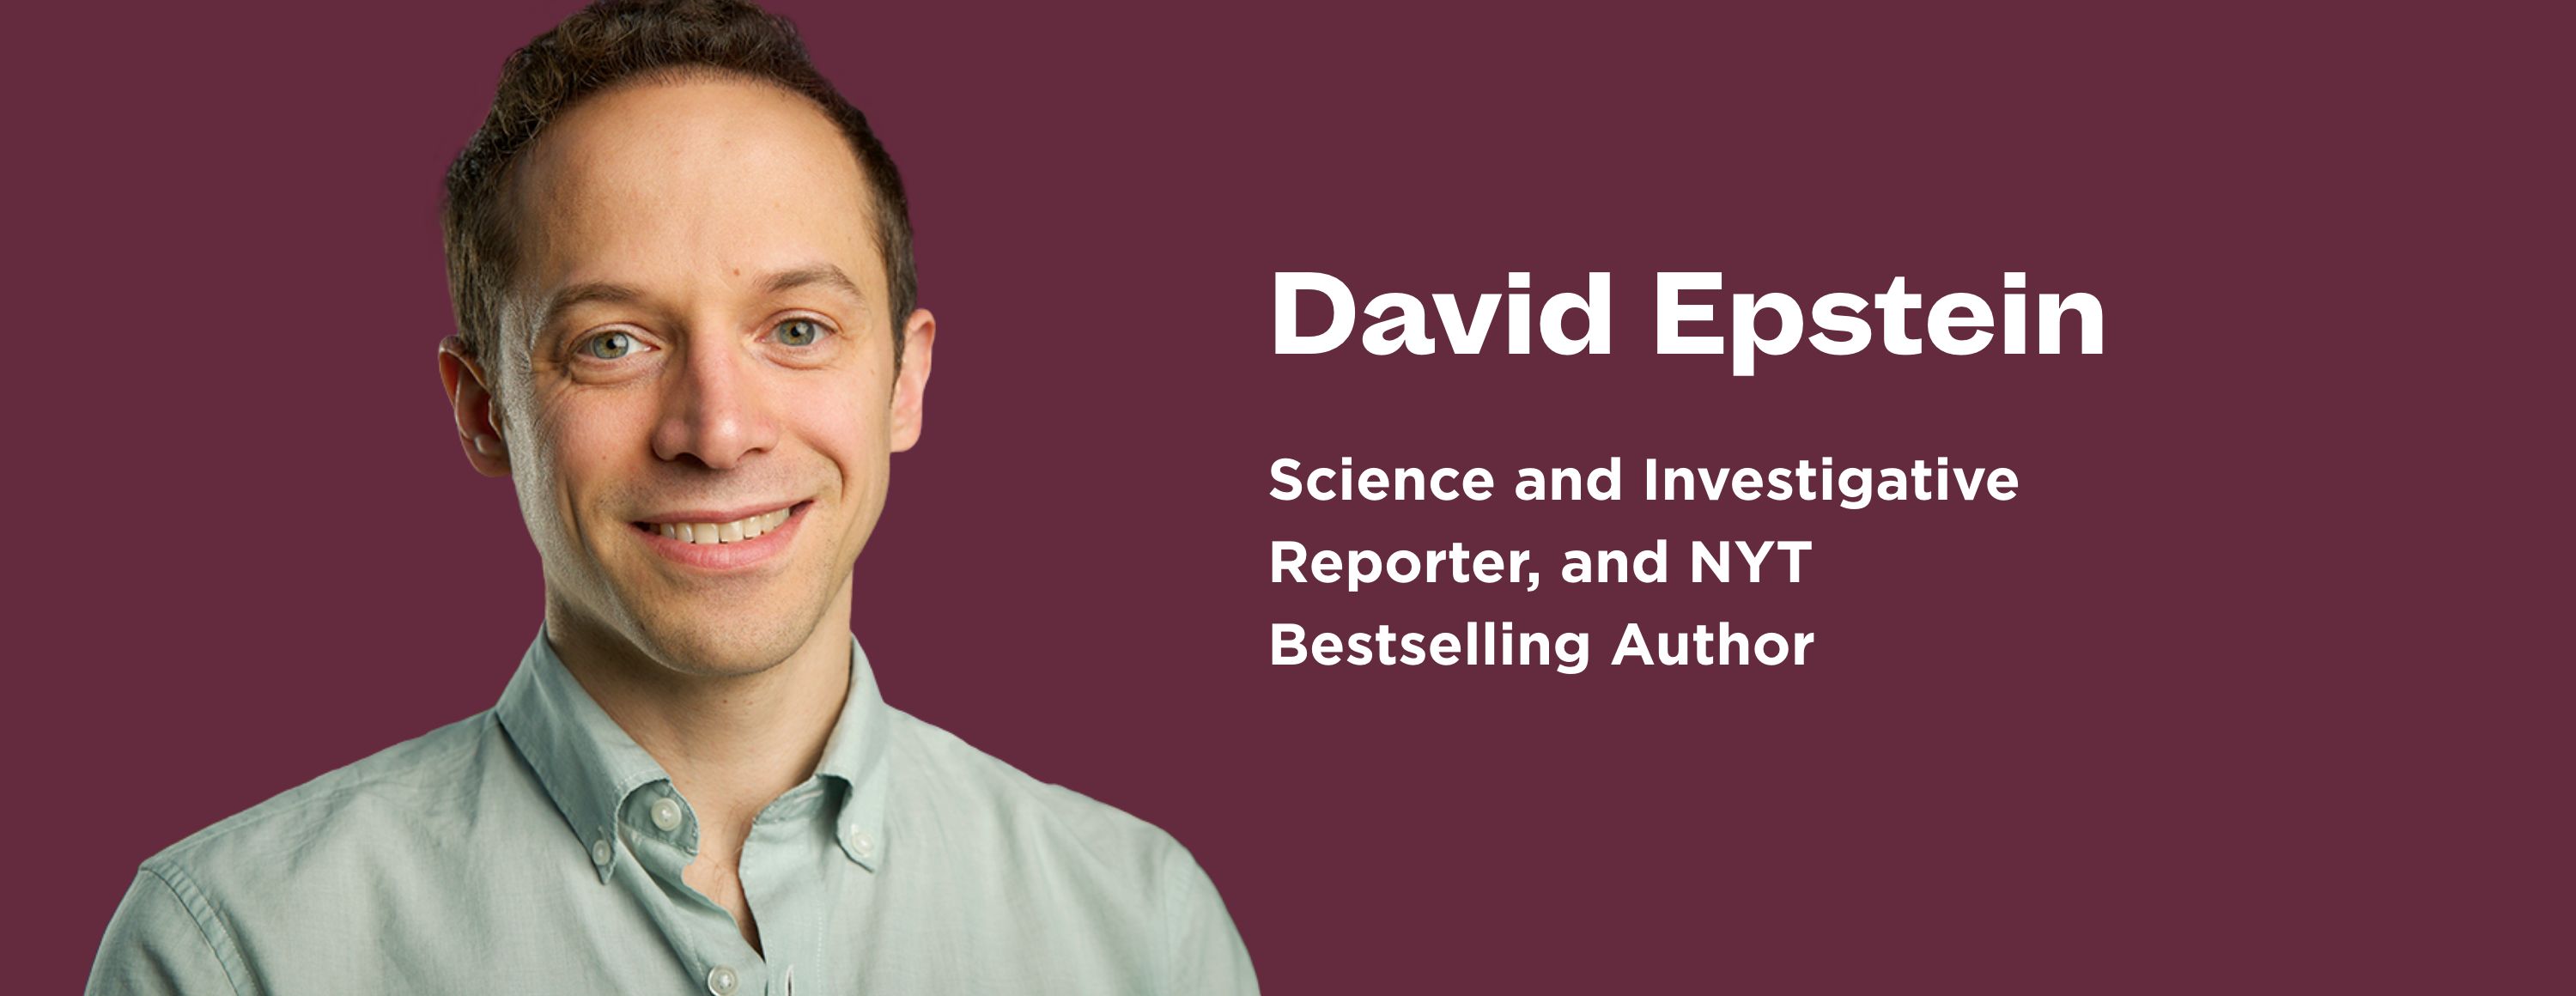 David Epstein: Science and Investigative Reporter, and NYT Bestselling Author